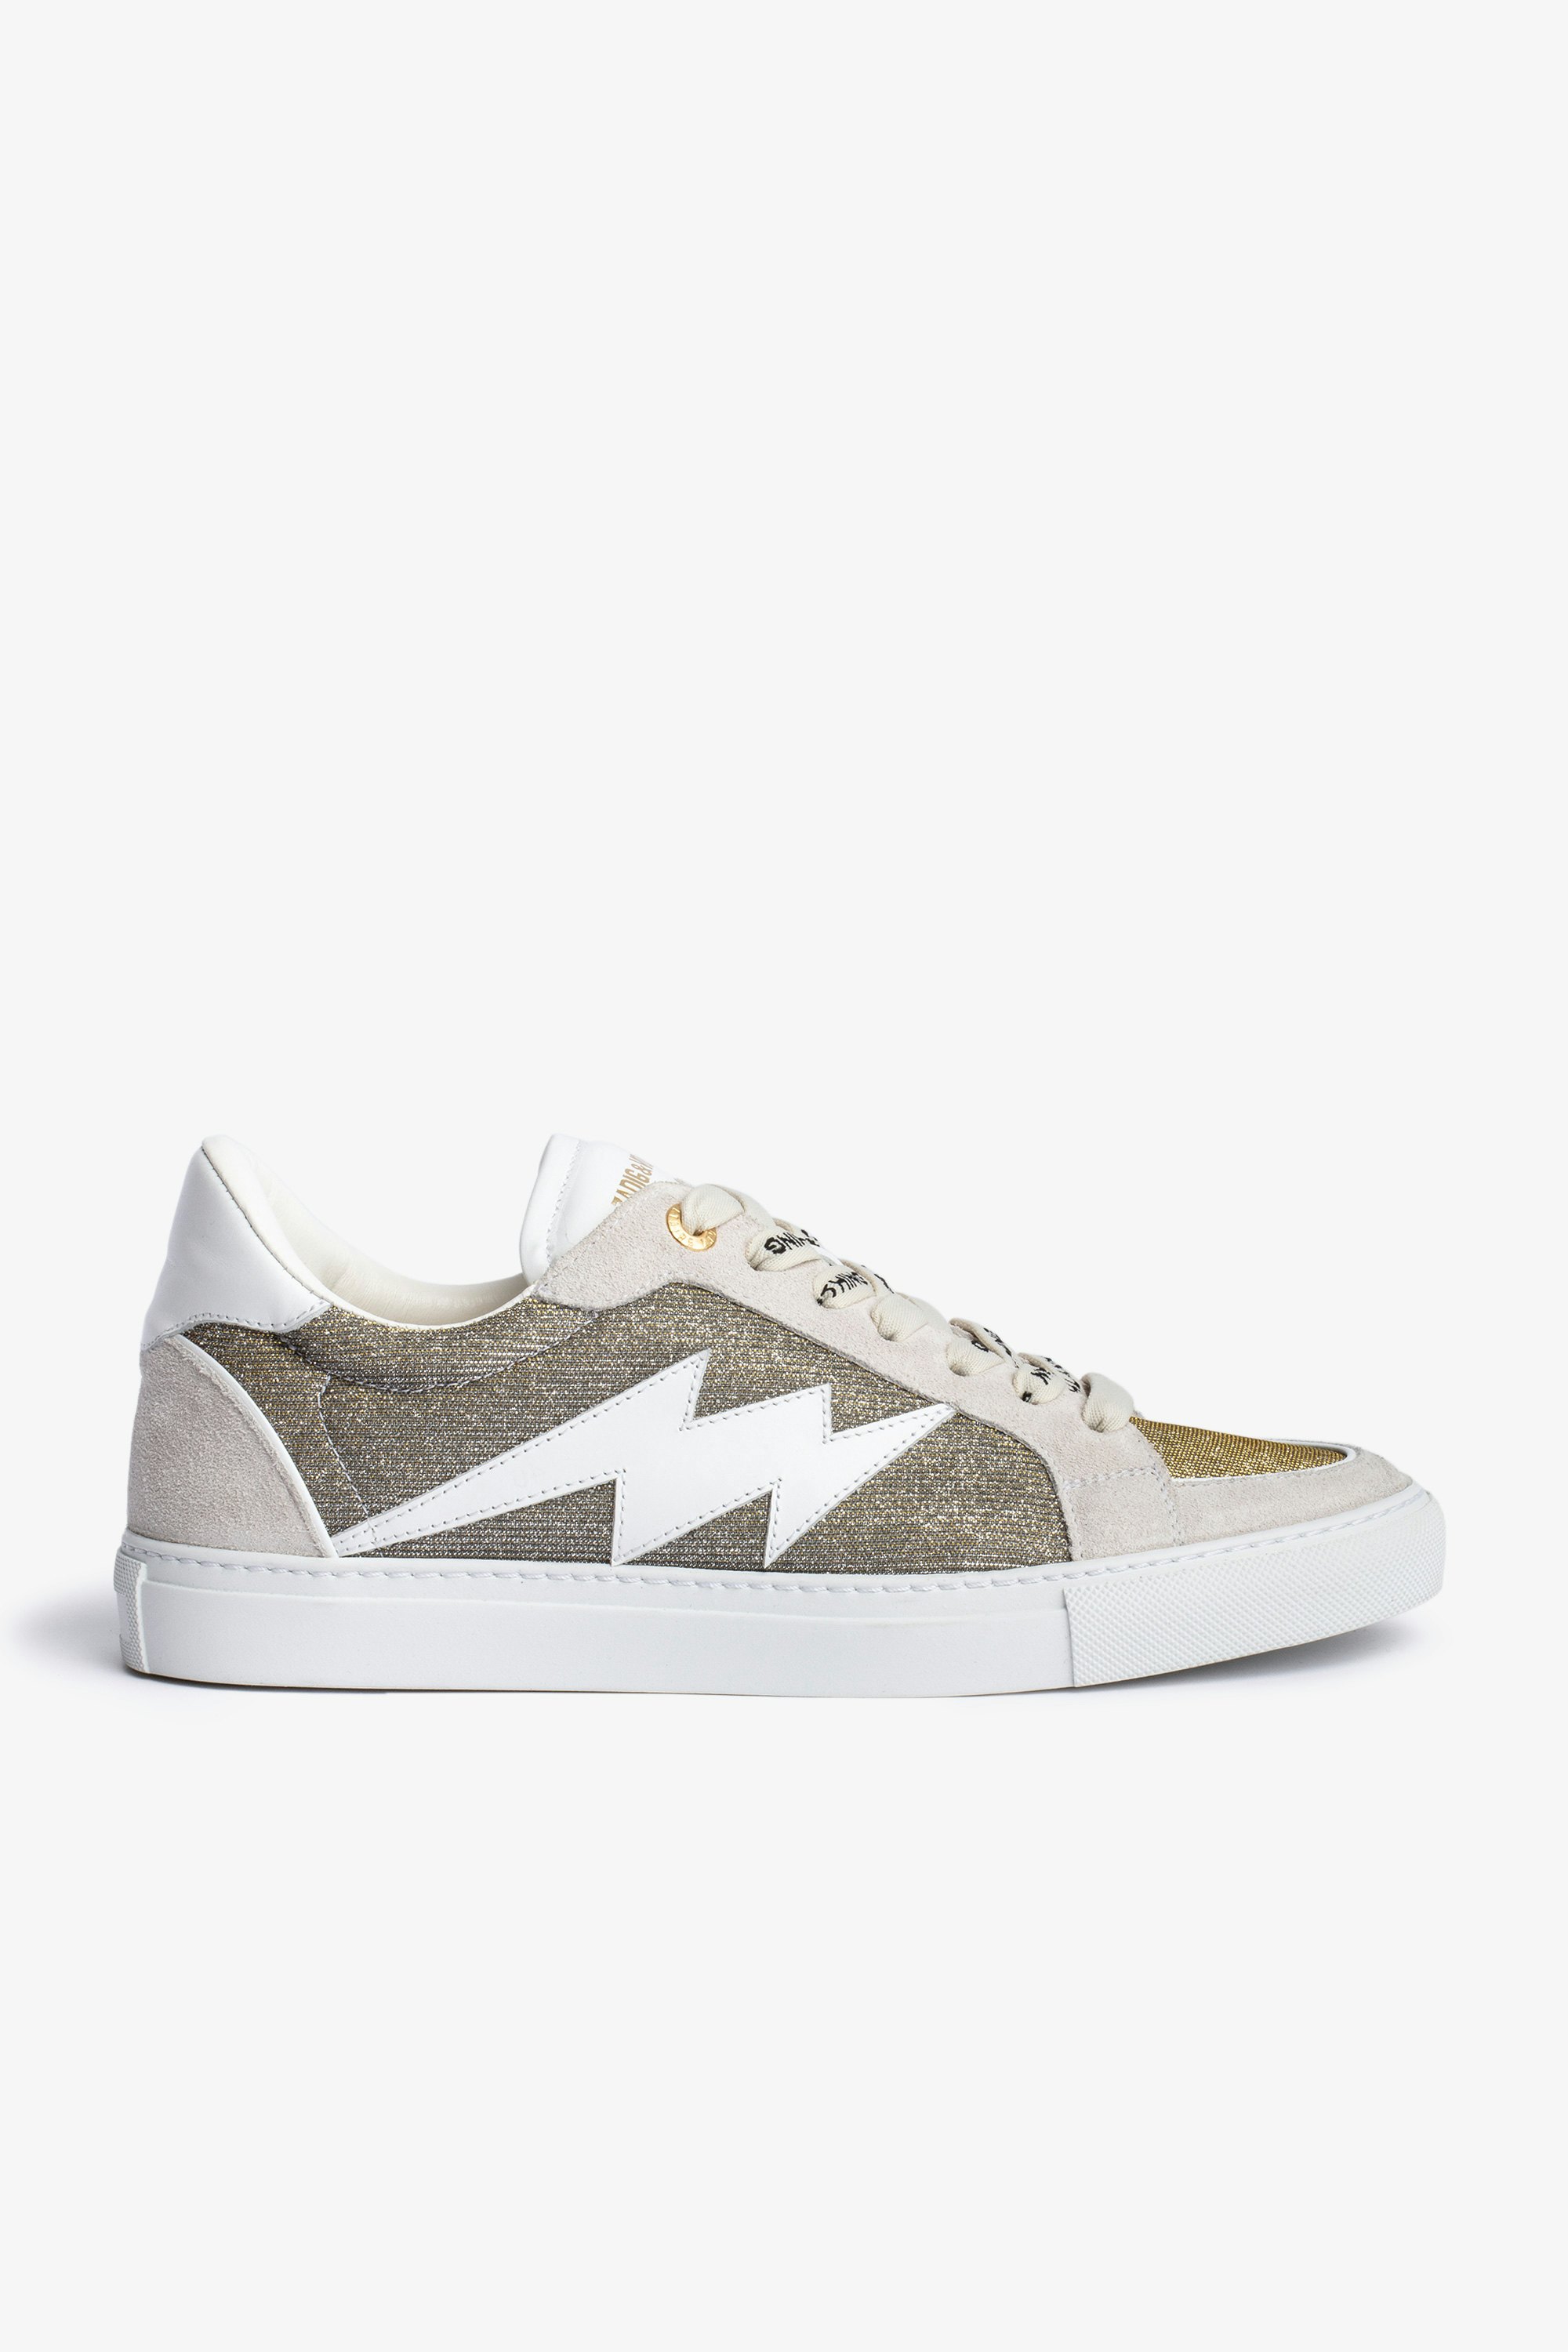 La Flash Trainers - Women's sneakers in white leather and silver glittery fabric